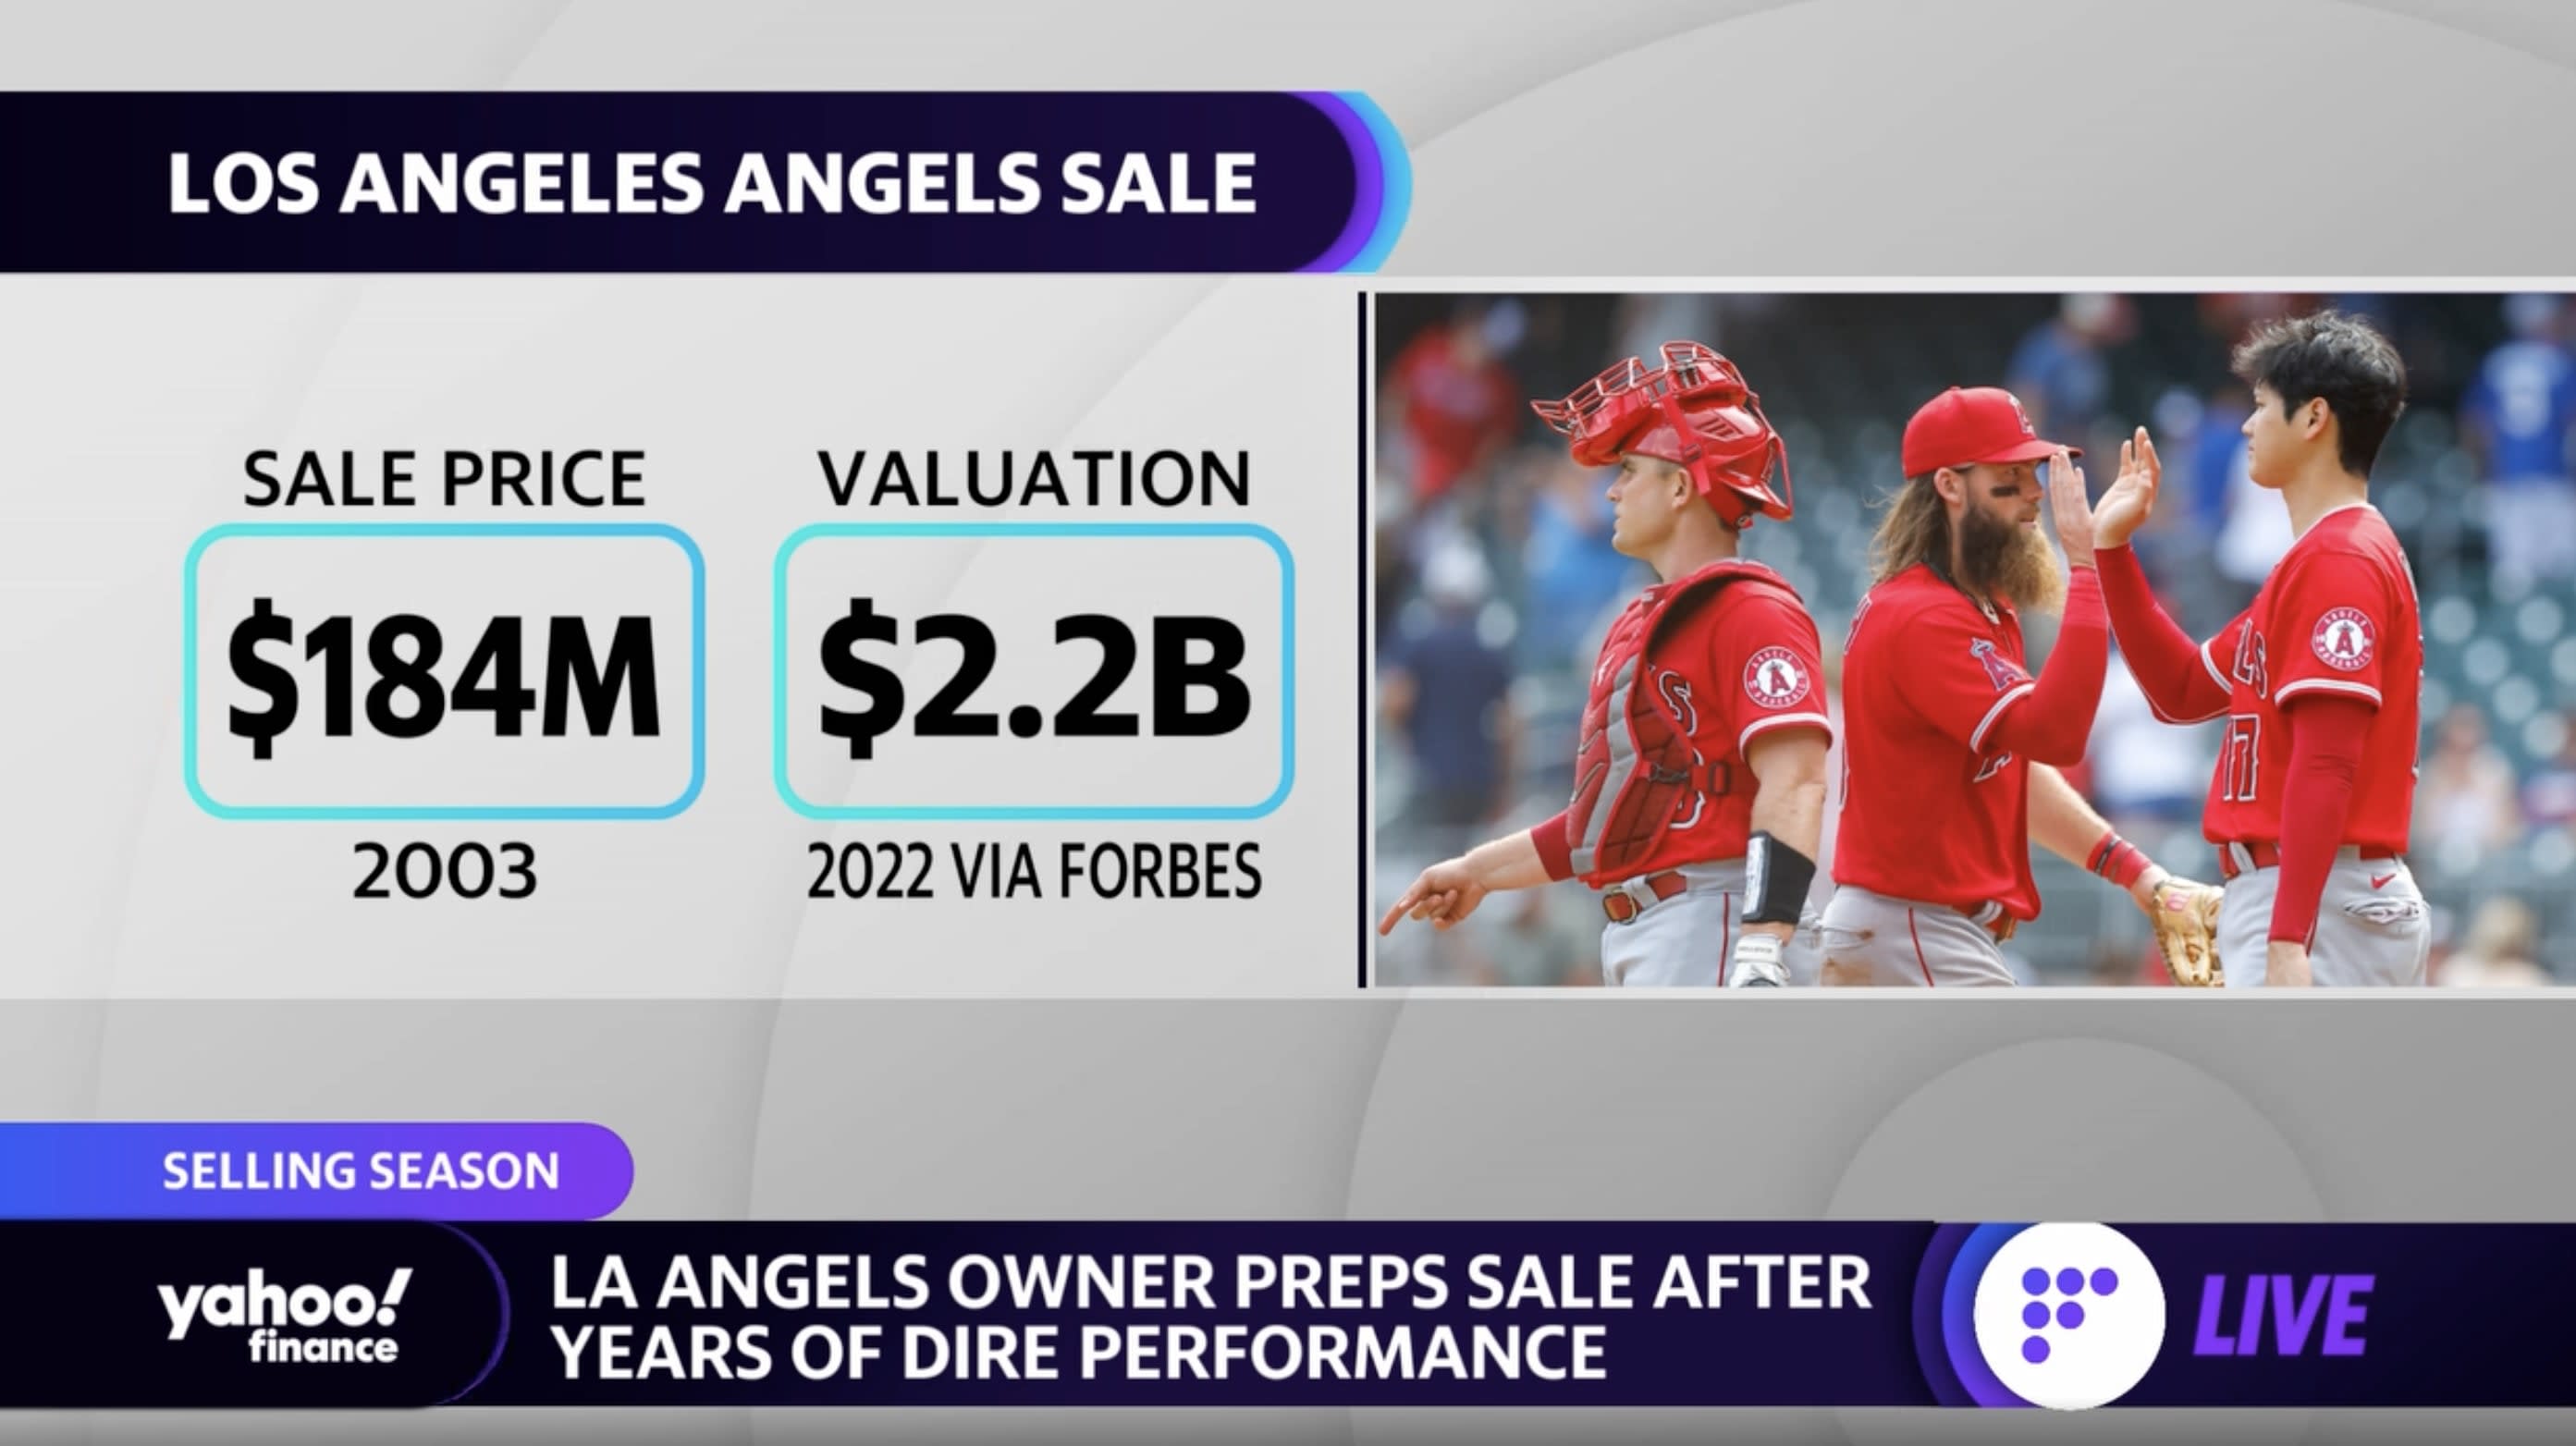 Los Angeles Angels owner Arte Moreno joins free-agent outfielder